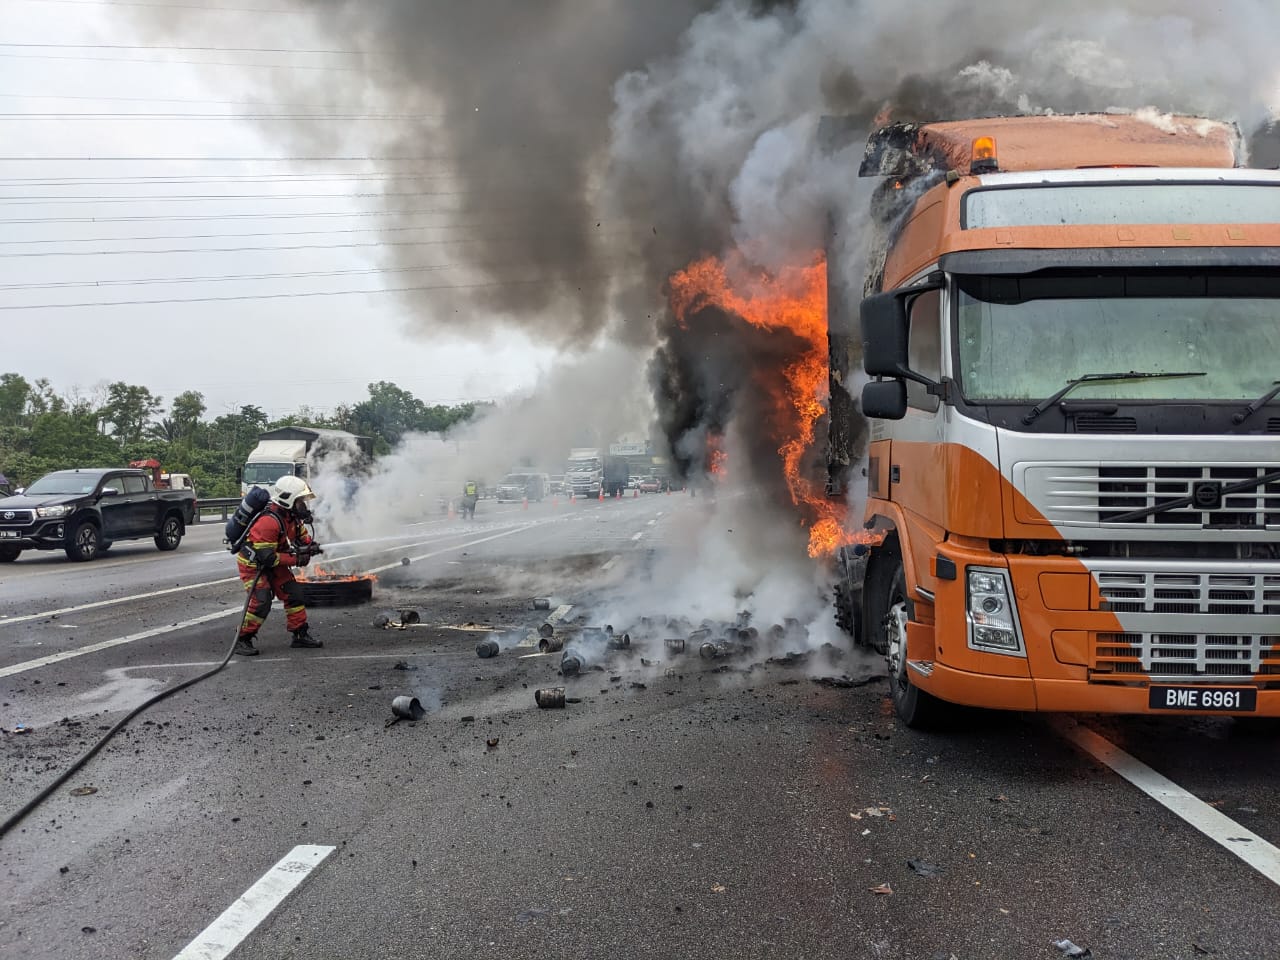 Lorry carrying formula milk up in flames on North-South Expressway